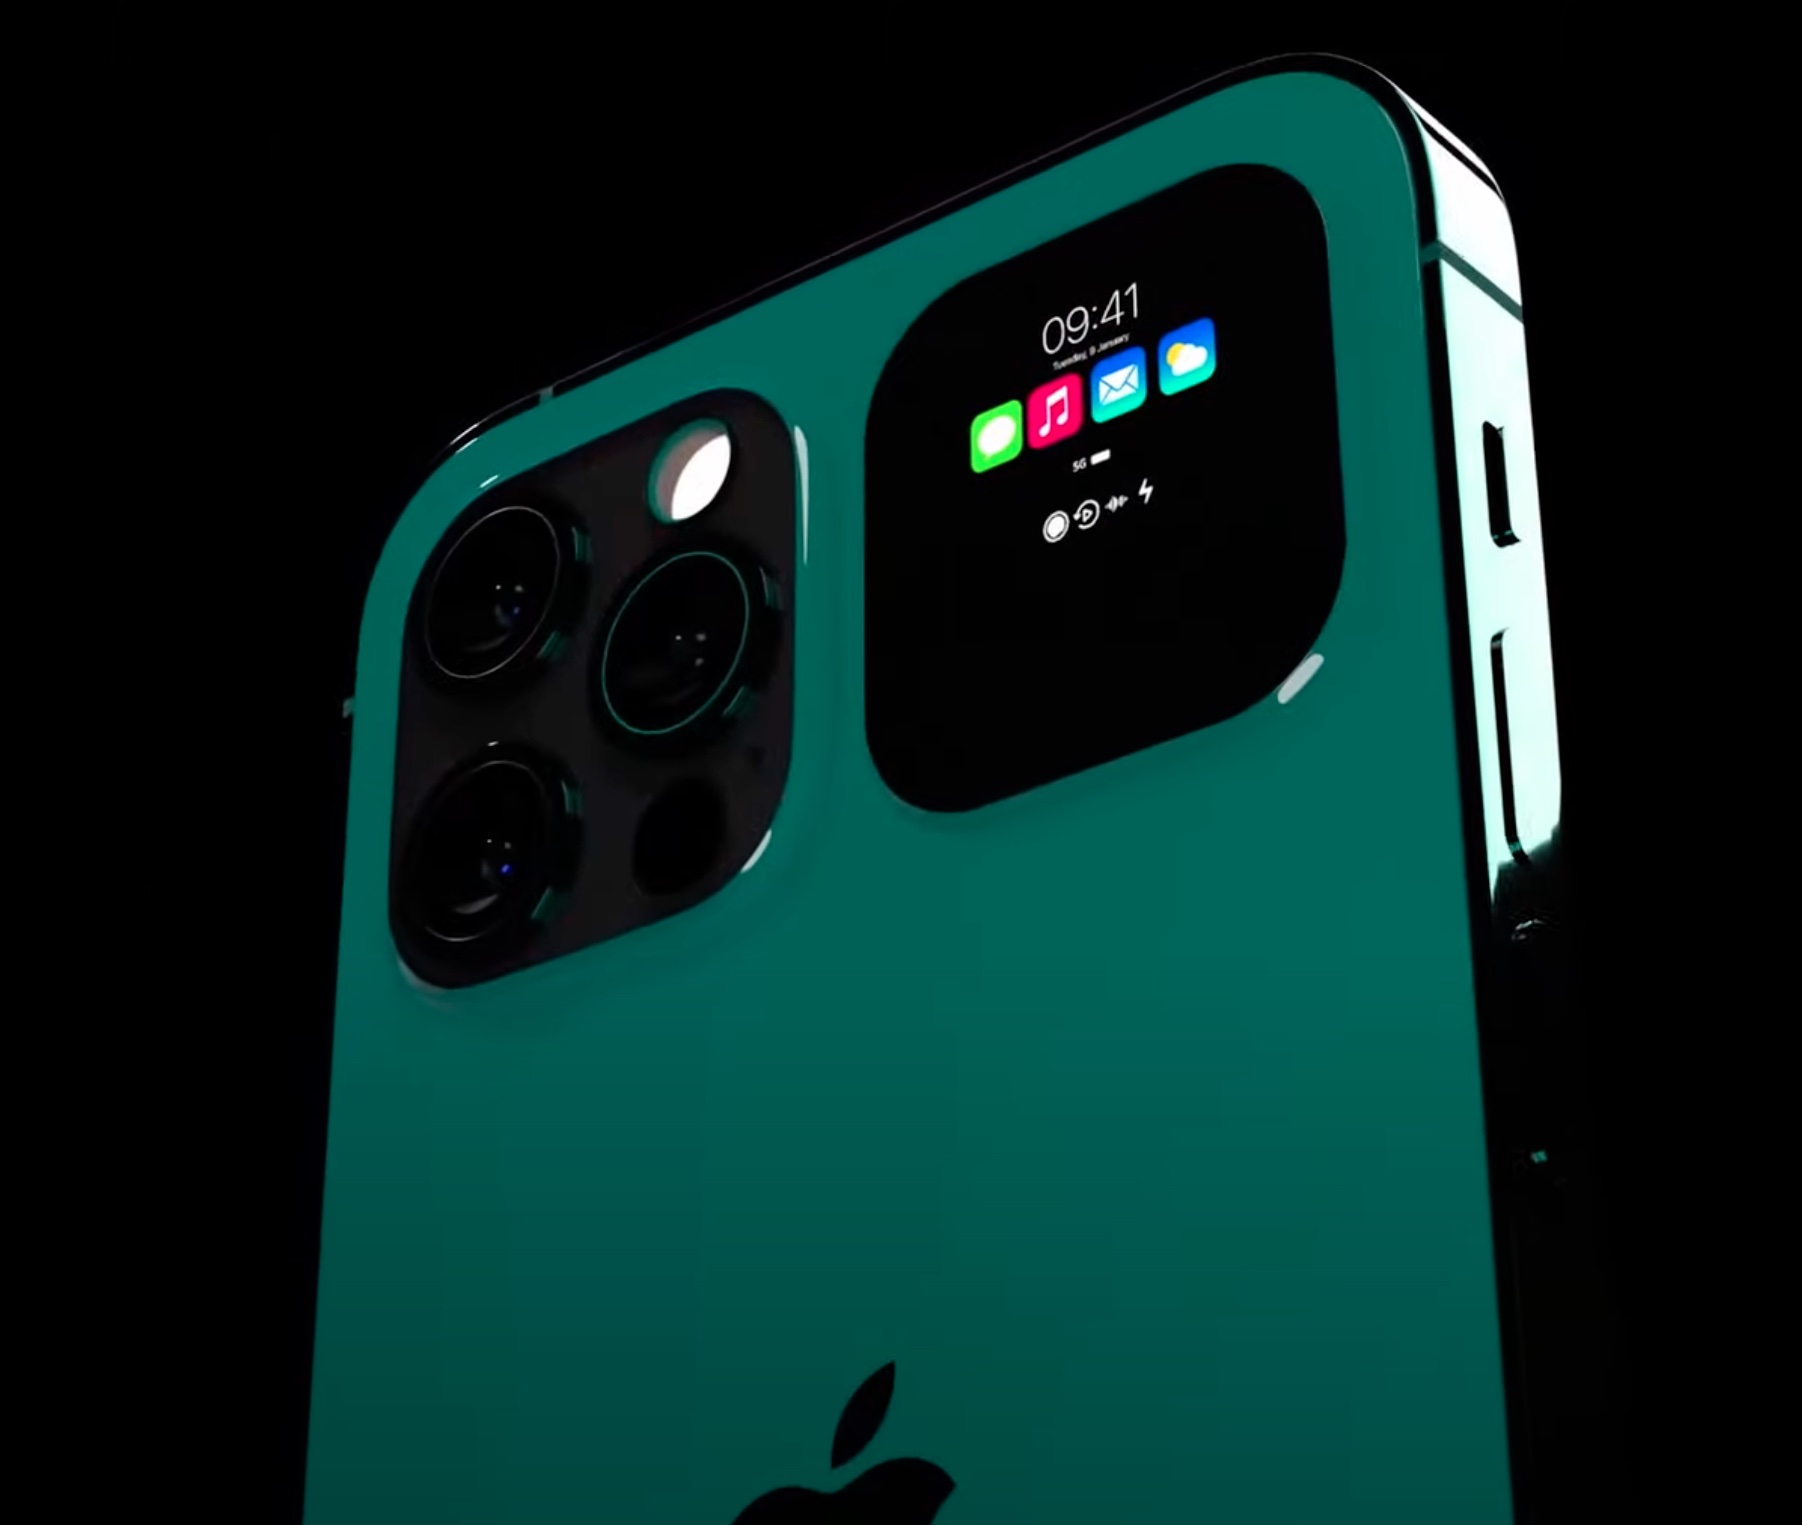 Introducing iPhone 15 Pro  Apple - (Concept Trailer) 